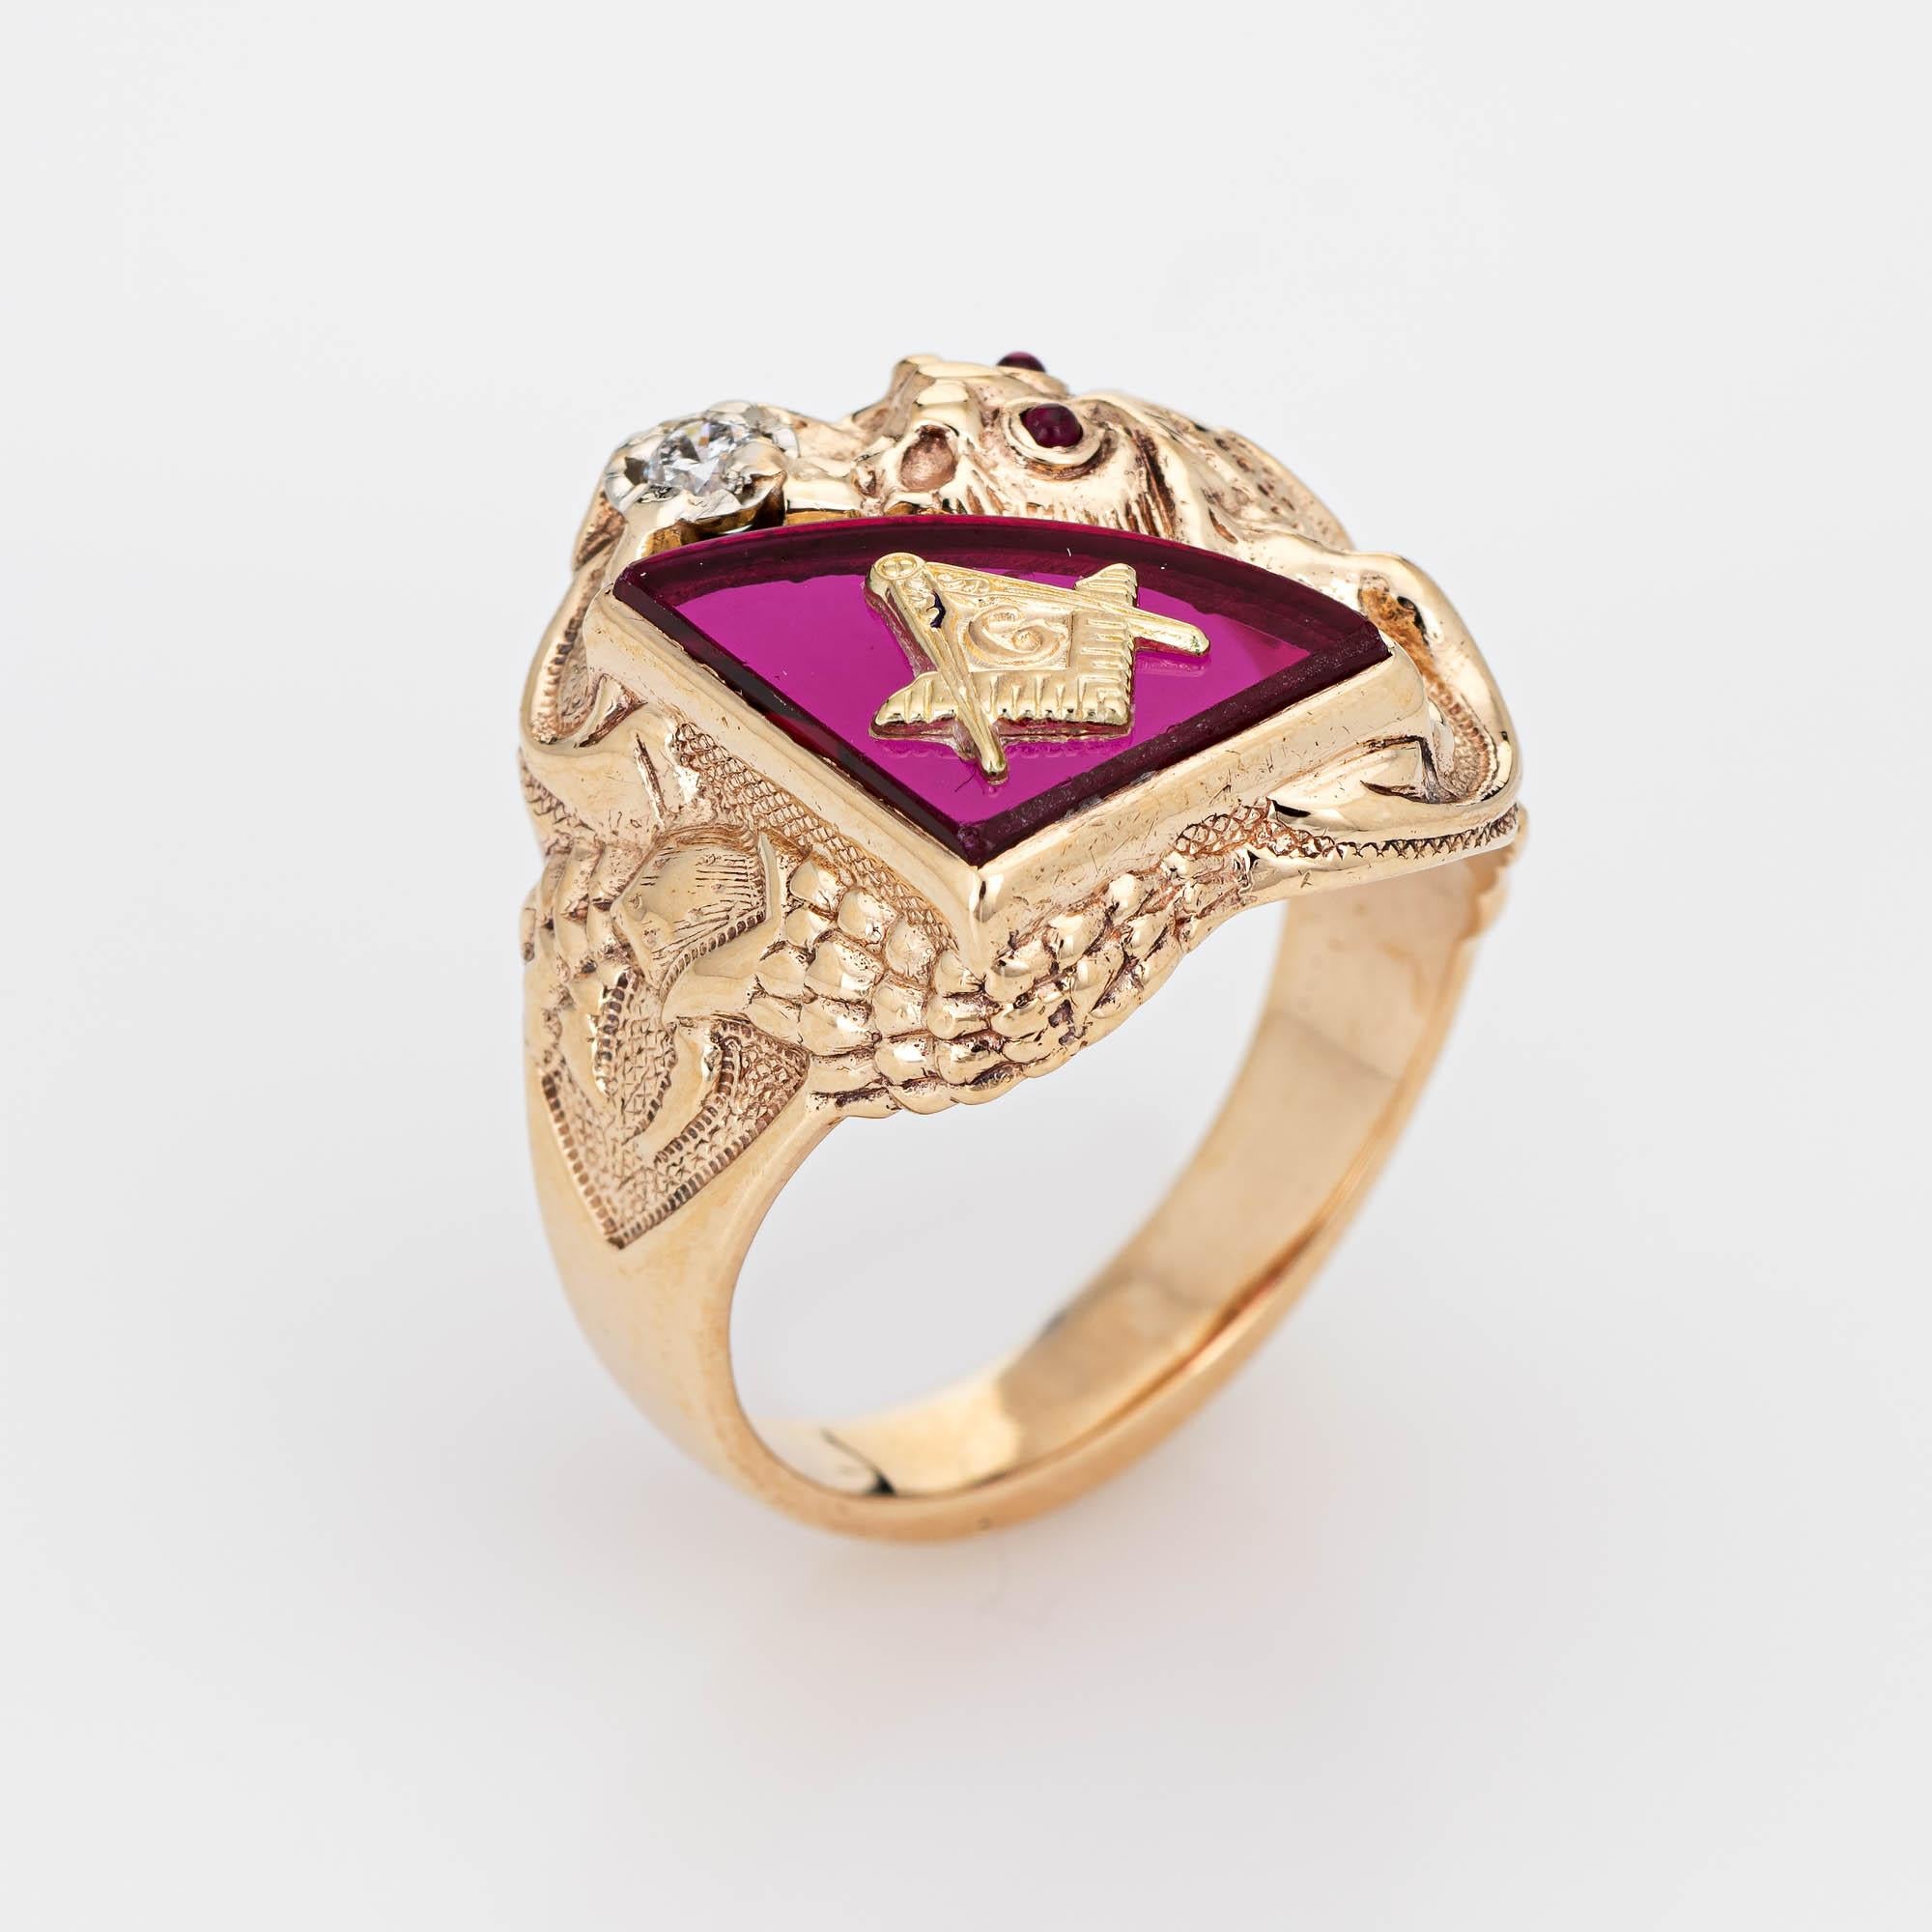 Finely detailed Masonic Lodge ring set with a diamond in a dragon motif, crafted in 10 karat yellow gold. 

One estimated 0.05 carat round brilliant cut diamond is set into the mount (estimated at H-I color and SI2 clarity). The red stone measures